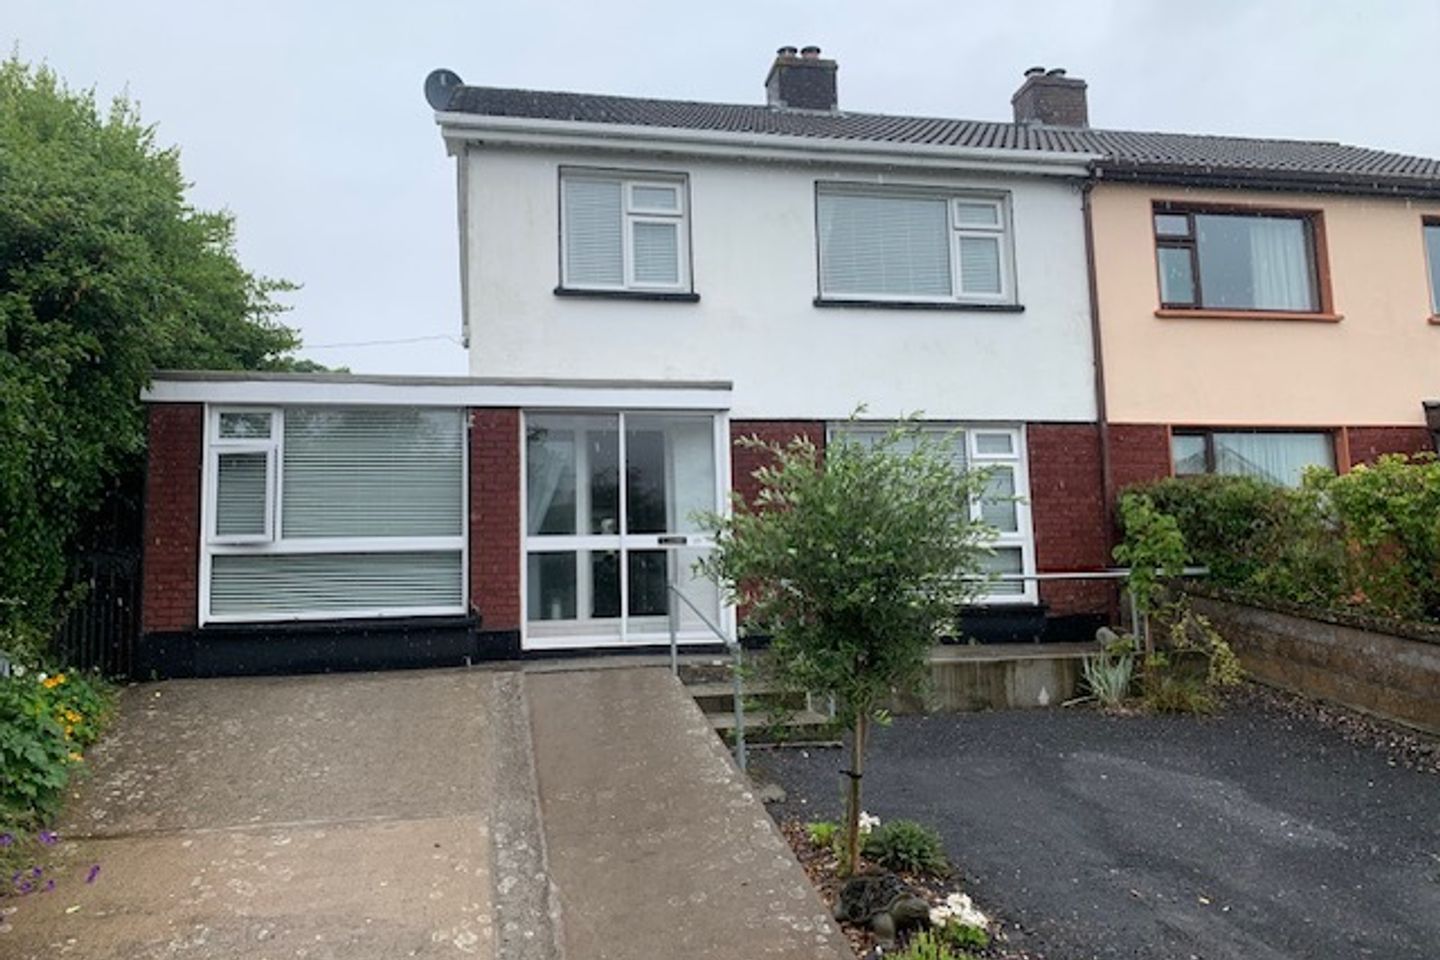 19 Murrough Drive, Renmore, Renmore, Co. Galway, H91X83P